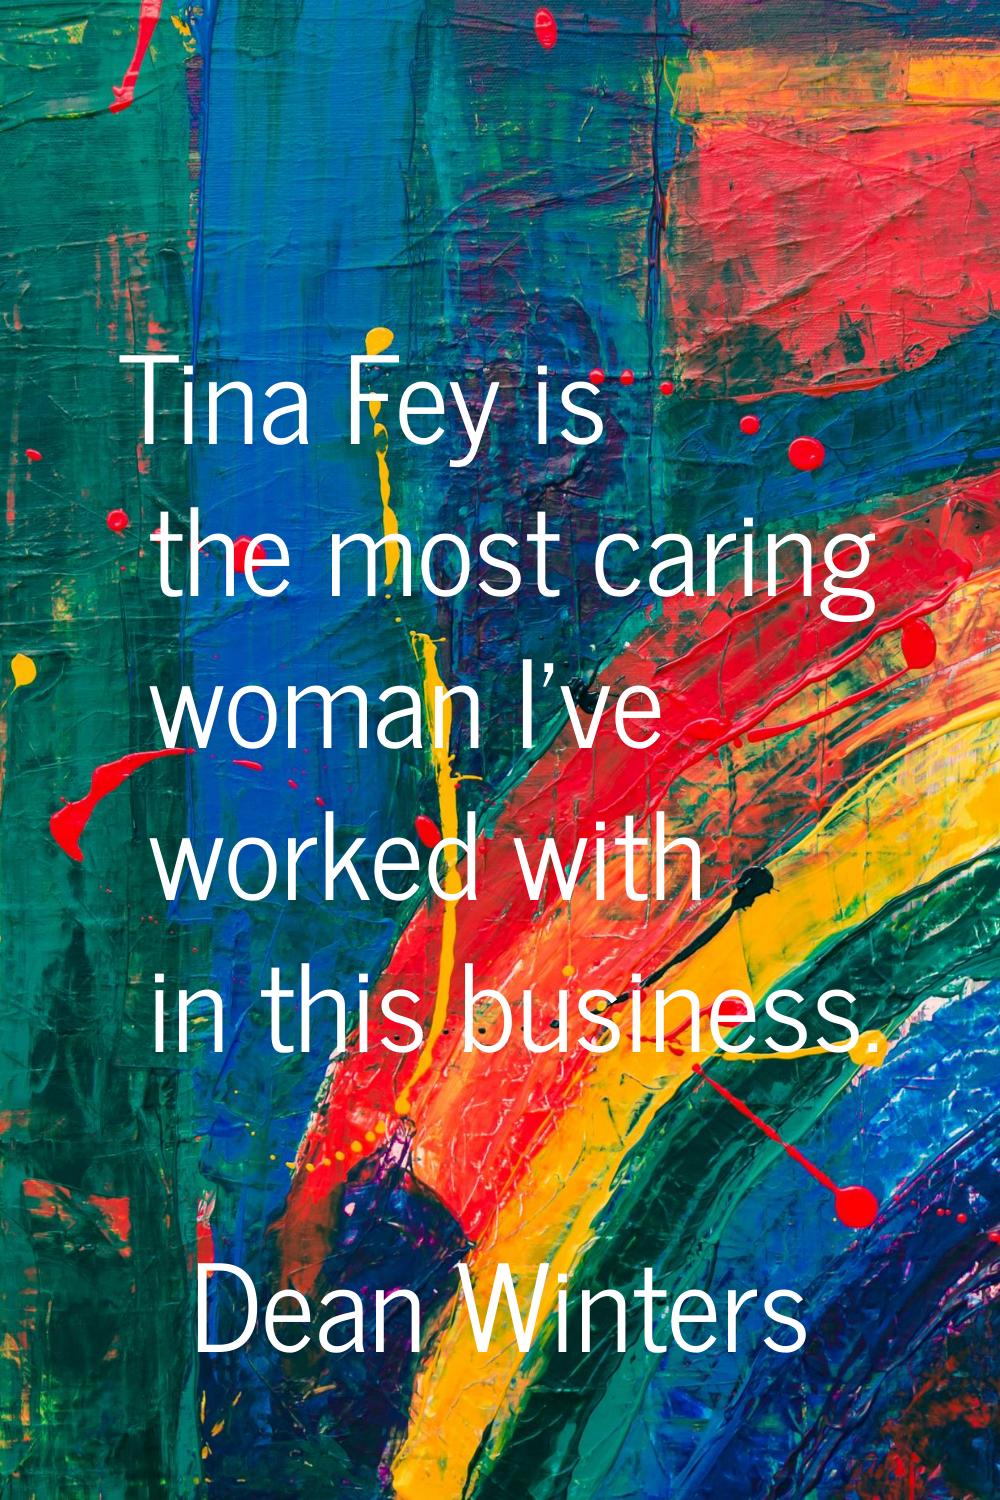 Tina Fey is the most caring woman I've worked with in this business.